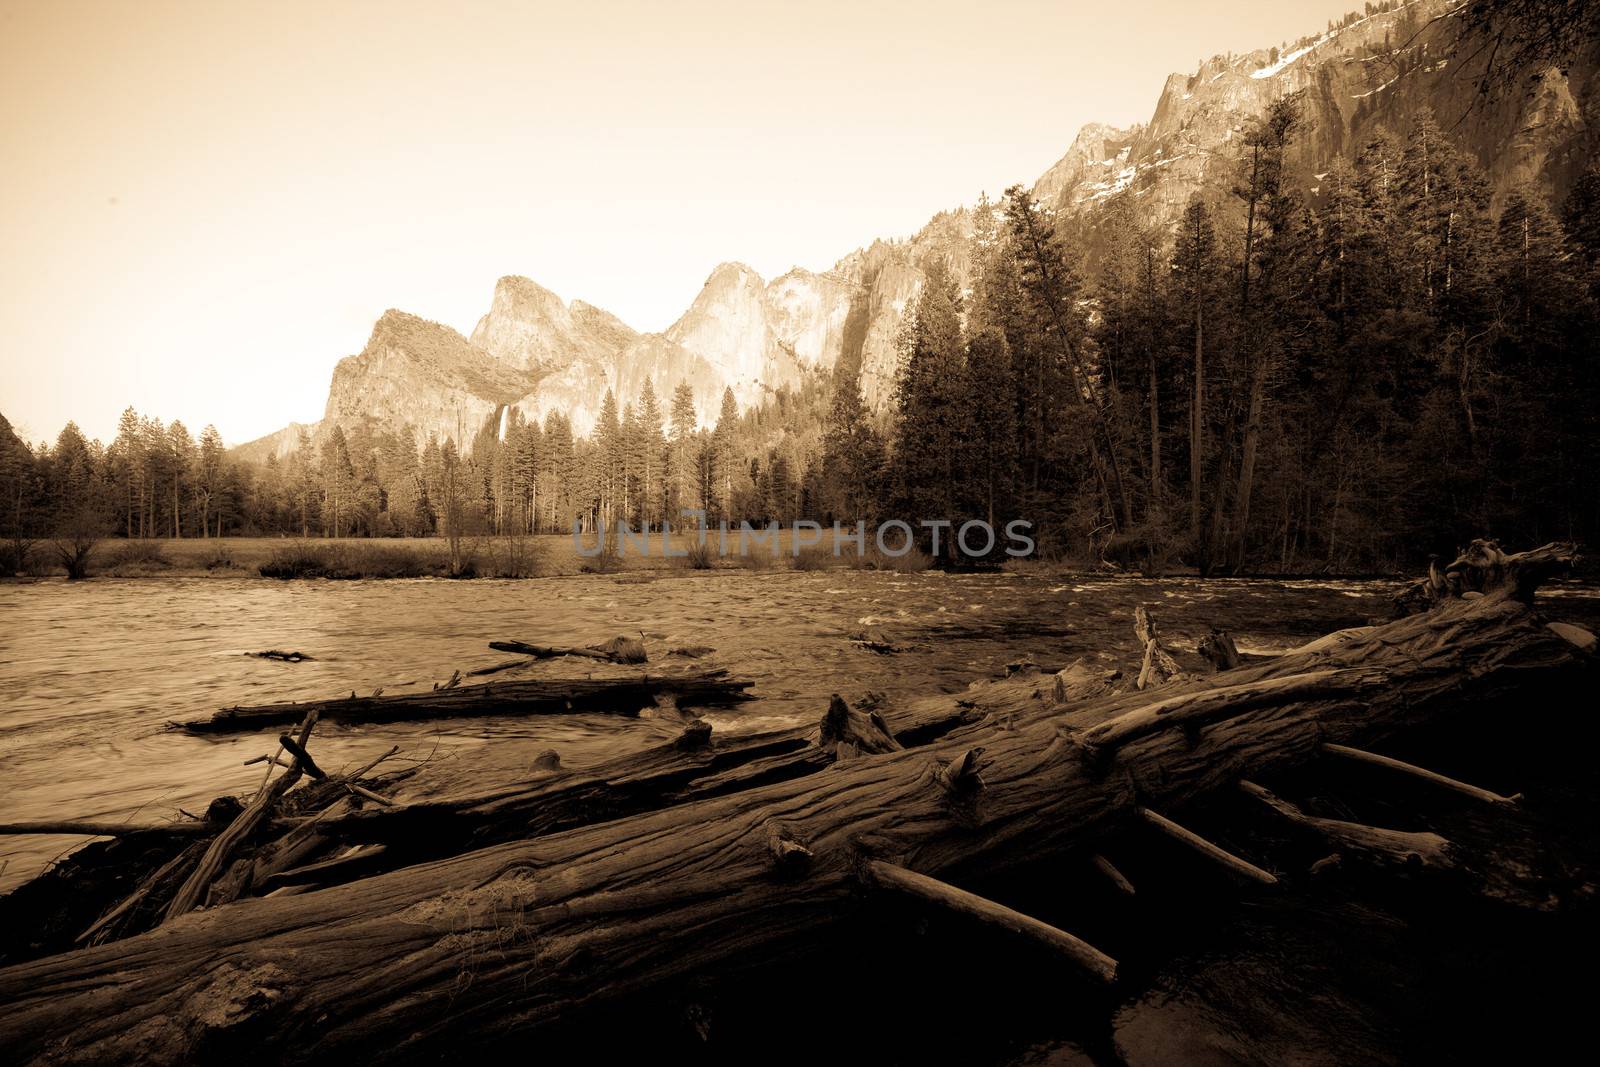 Fallen trees in a river with mountain range in the background, Bridal Veil Falls, Yosemite Valley, Yosemite National Park, California, USA